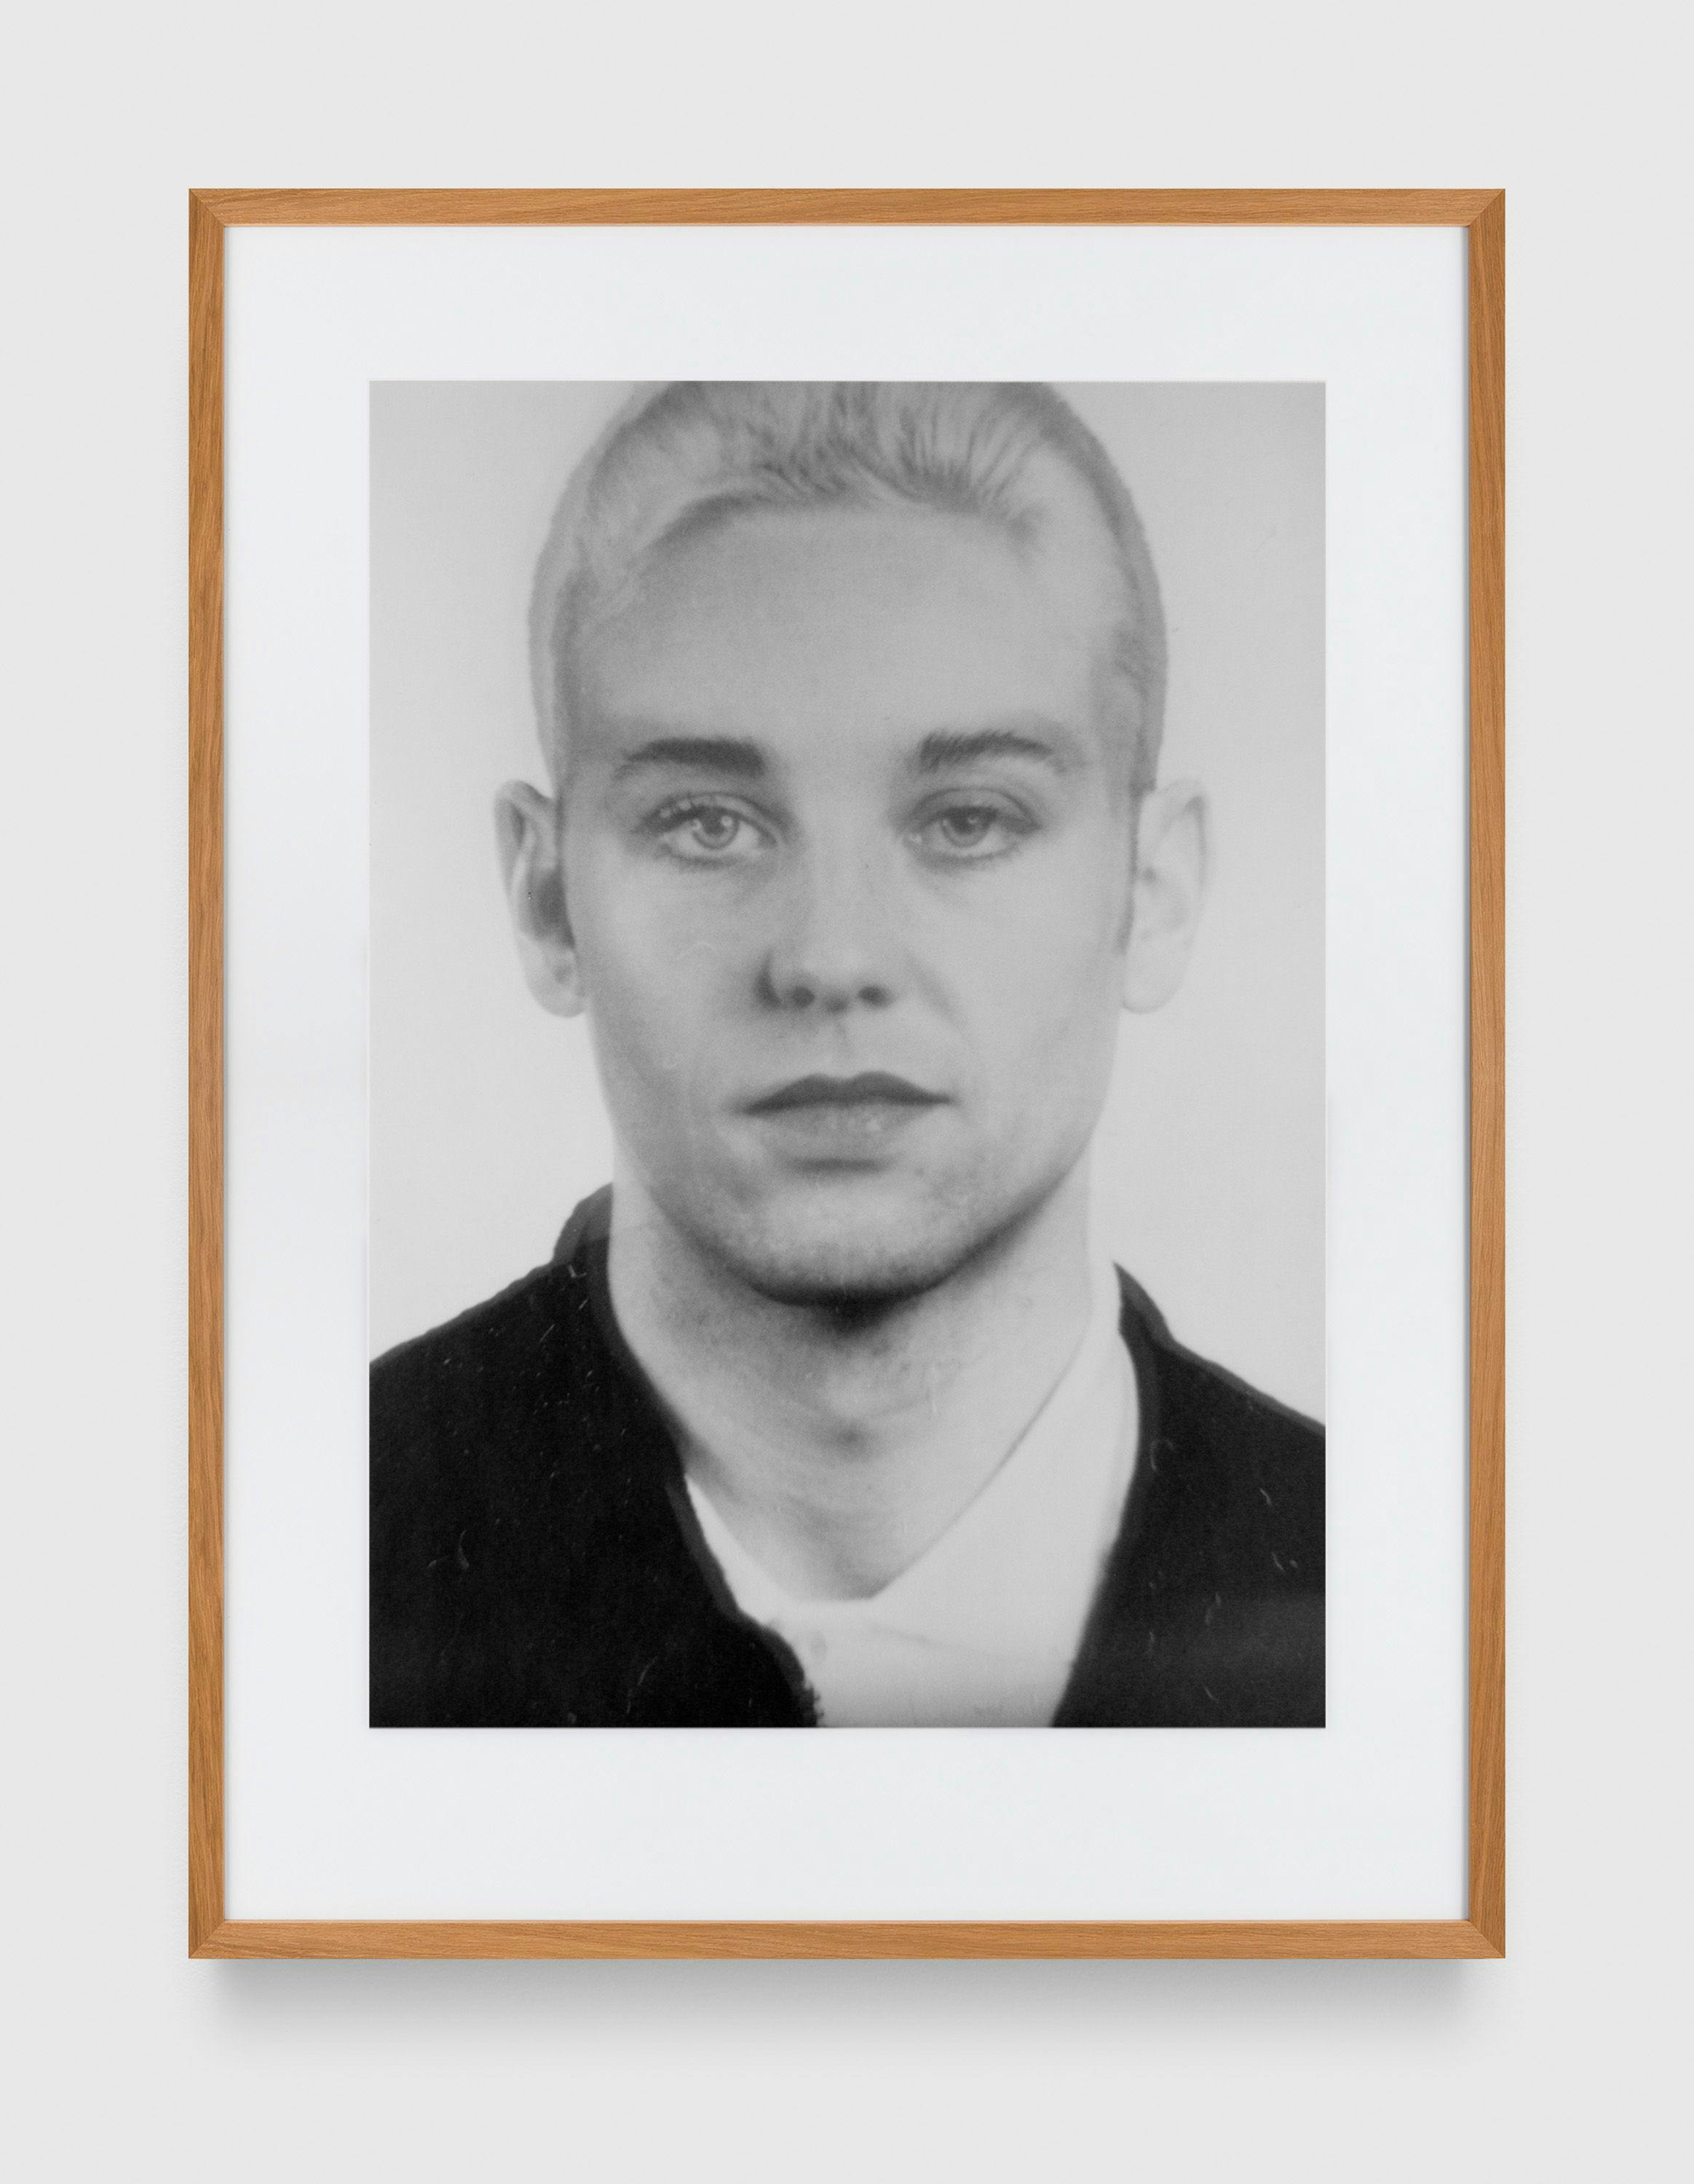 A print by Thomas Ruff, titled anderes Porträt Nr. 122/113, 1994 to 1995.